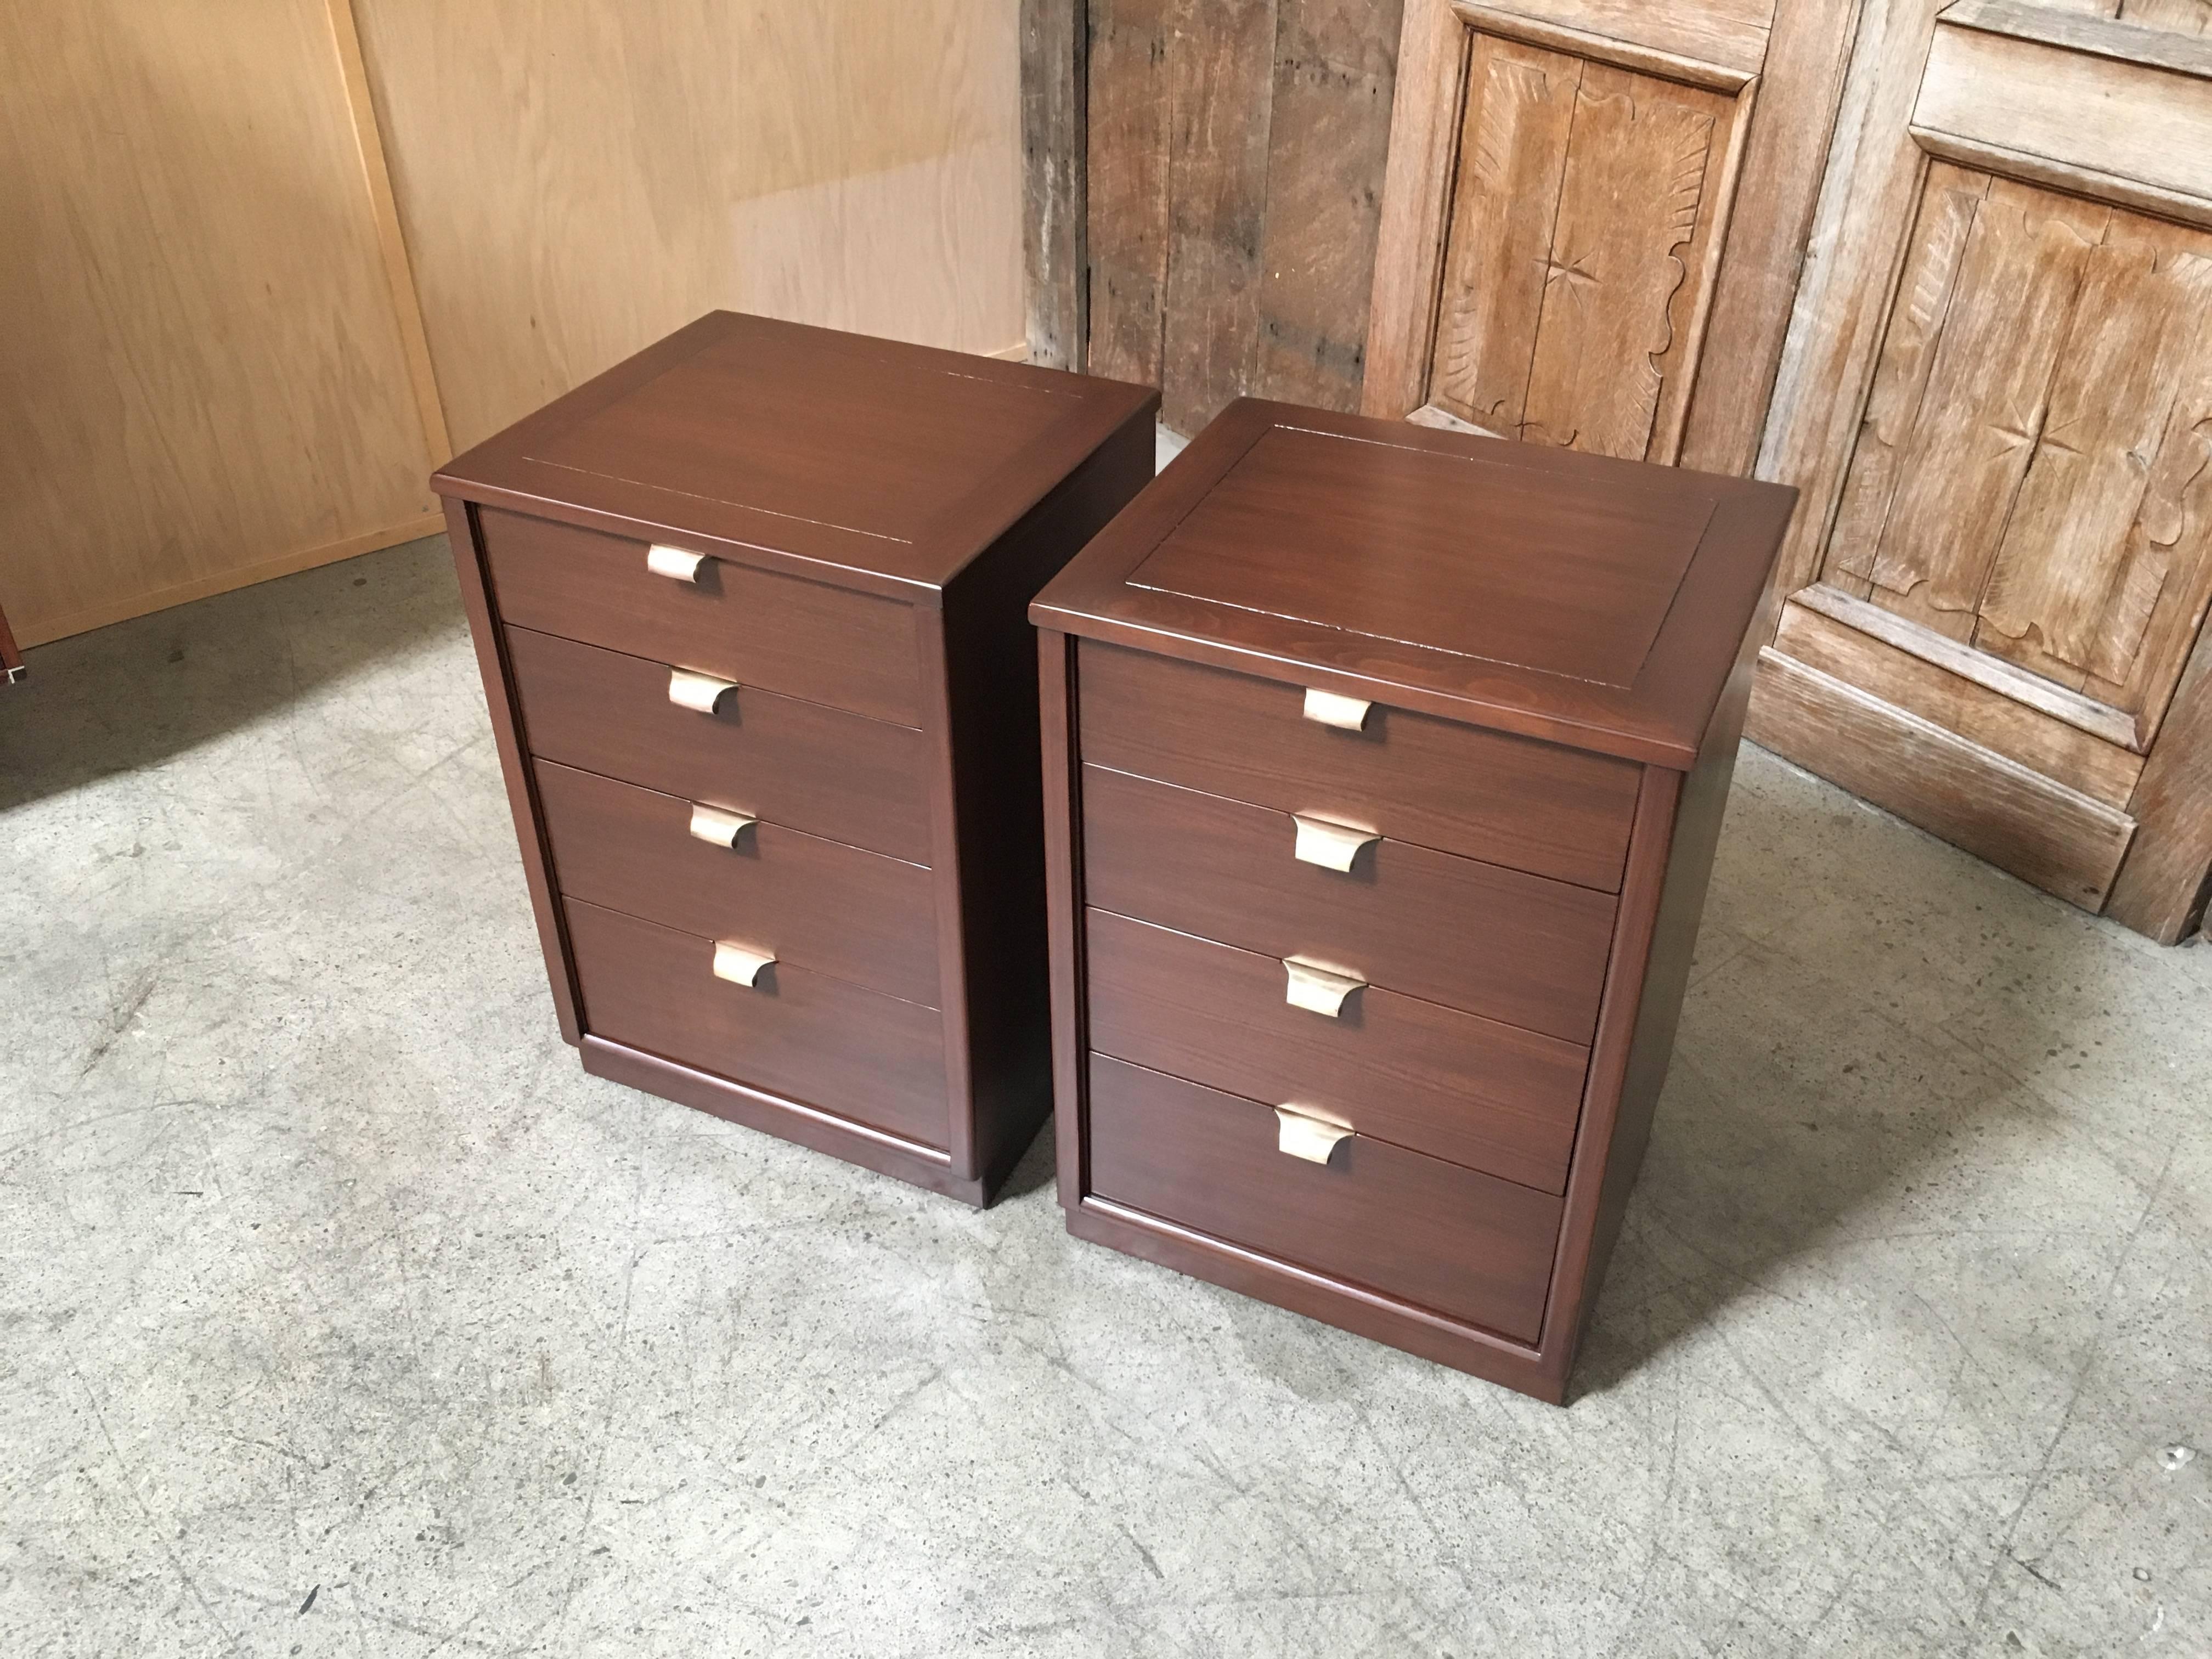 Great pair of precedent nightstands finished in a medium walnut with solid brass drawer pulls.